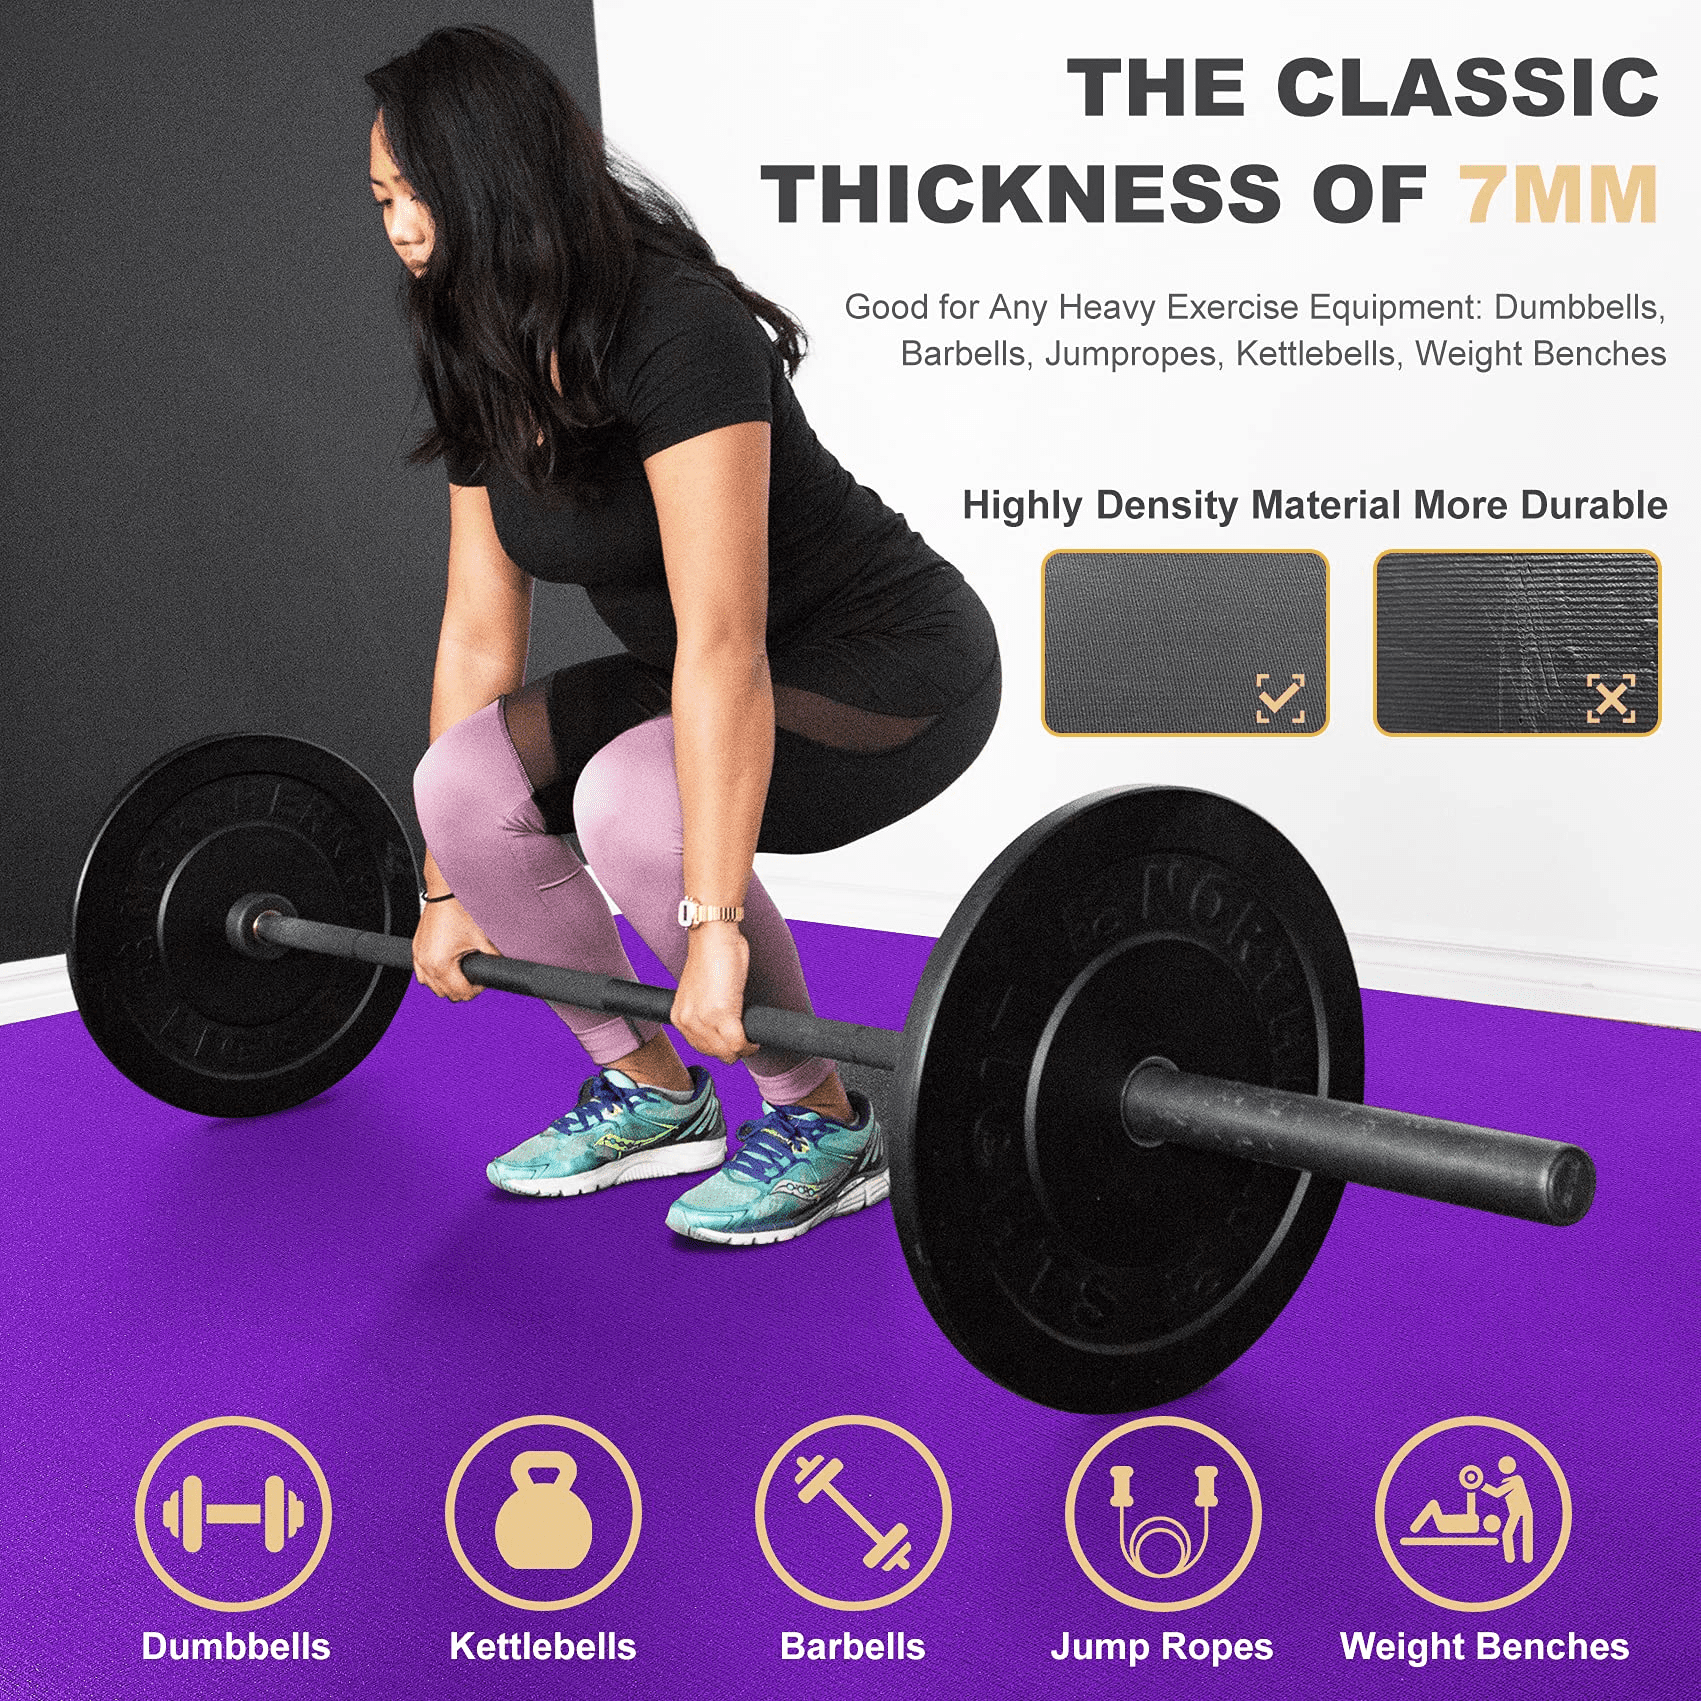 See You In Gym Fitness Workout Weights Mat Rug Carpet Anti-slip Floor Mats  Bedroom Fitness Workout Fitness Exercise Gym Weights - Mat - AliExpress